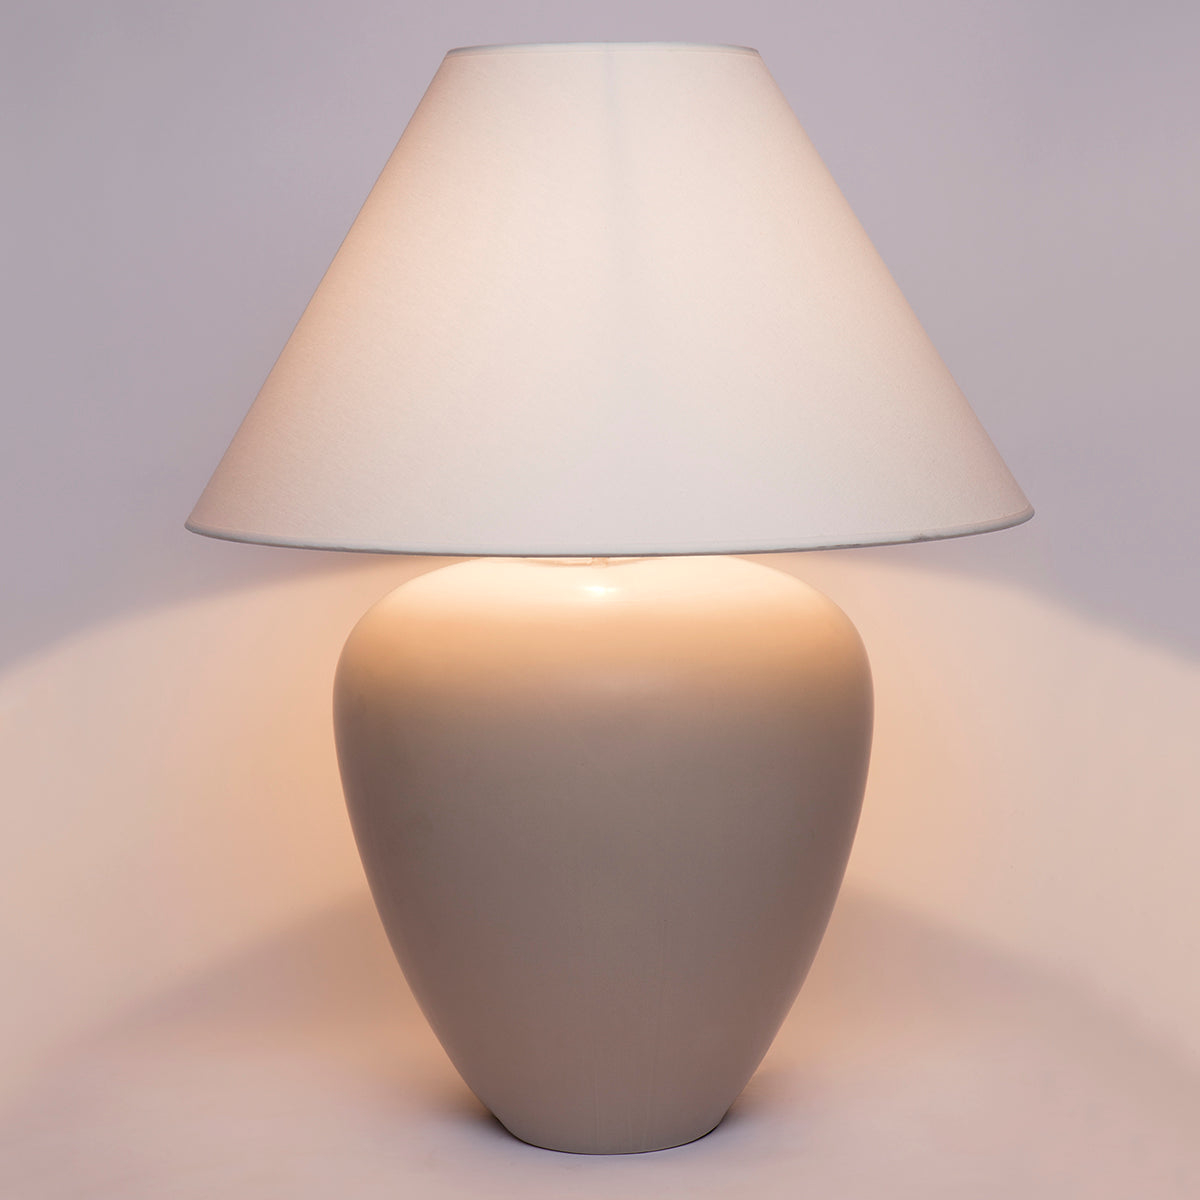 Picasso Table Lamp - Natural w White Shade